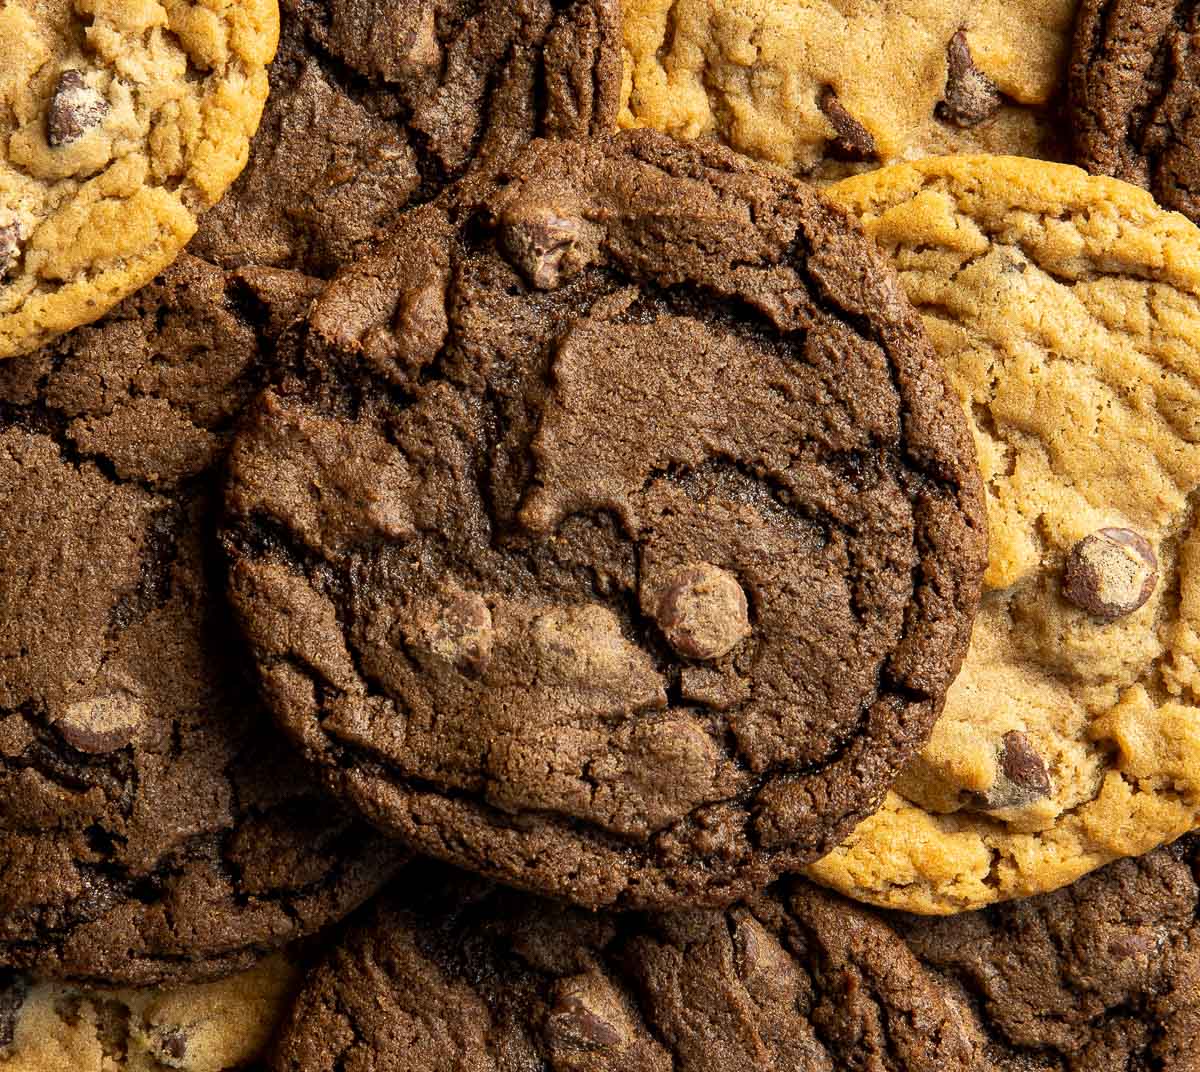 Picture of a bunch of Double fudge cookies and Original Chocolate Chip Cookie